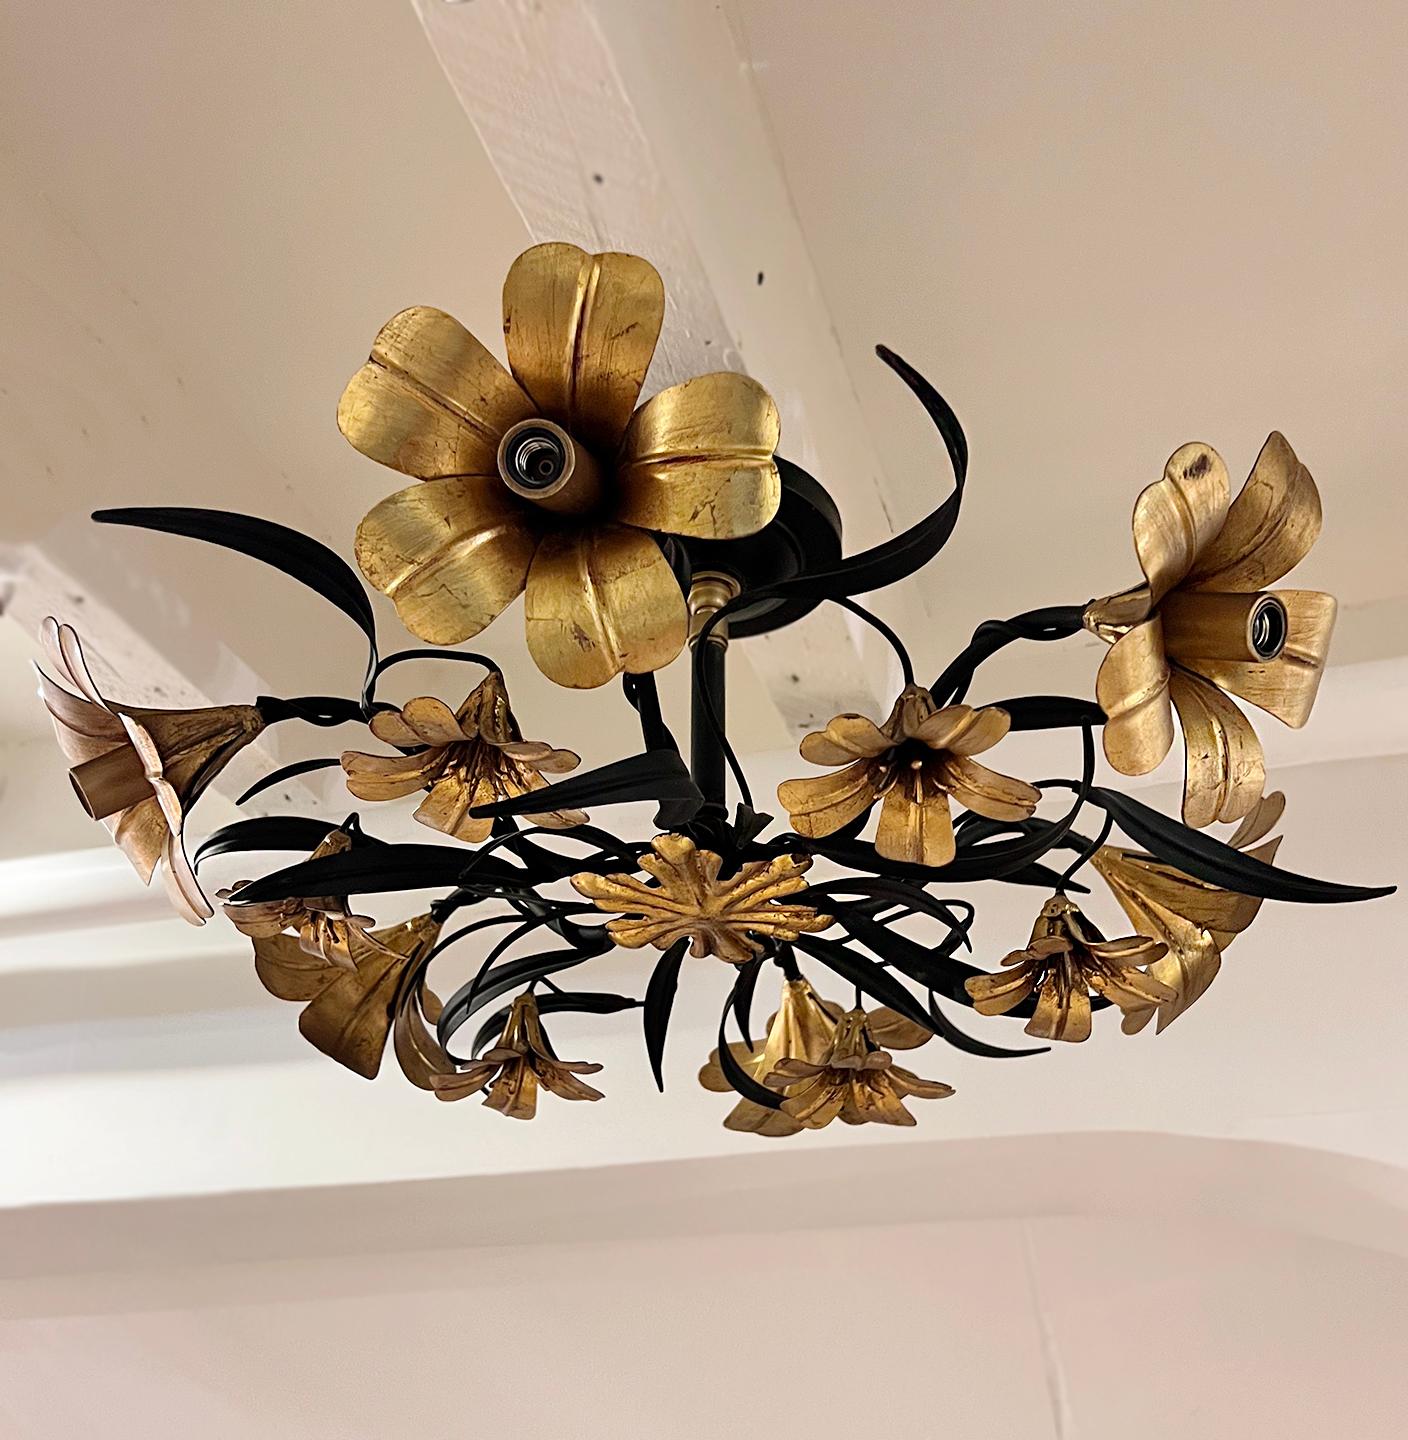 Pair of circa 1960's Italian gilt metal light fixtures with floral motif. Semi flush body, with 6 lights each. Sold individually.

Measurements:
Height: 9